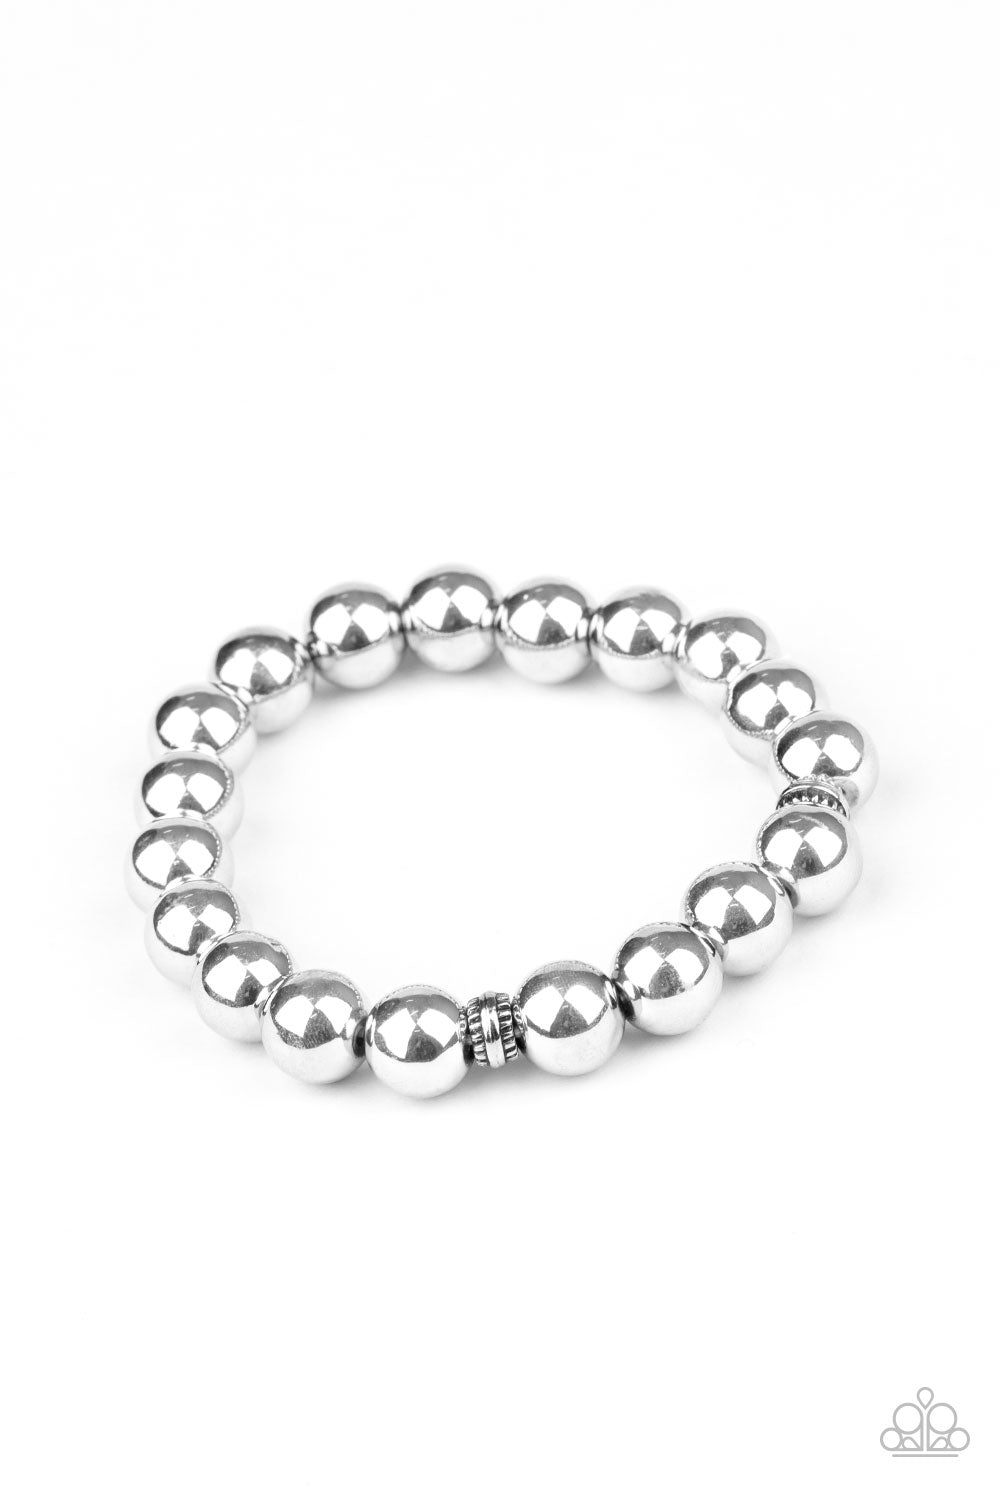 Resilience Silver Urban Bracelet - Paparazzi Accessories  Infused with dainty silver accent pieces, a collection of oversized silver beads are threaded along a stretchy band around the wrist for a causally urban look.  All Paparazzi Accessories are lead free and nickel free!  Sold as one individual bracelet.